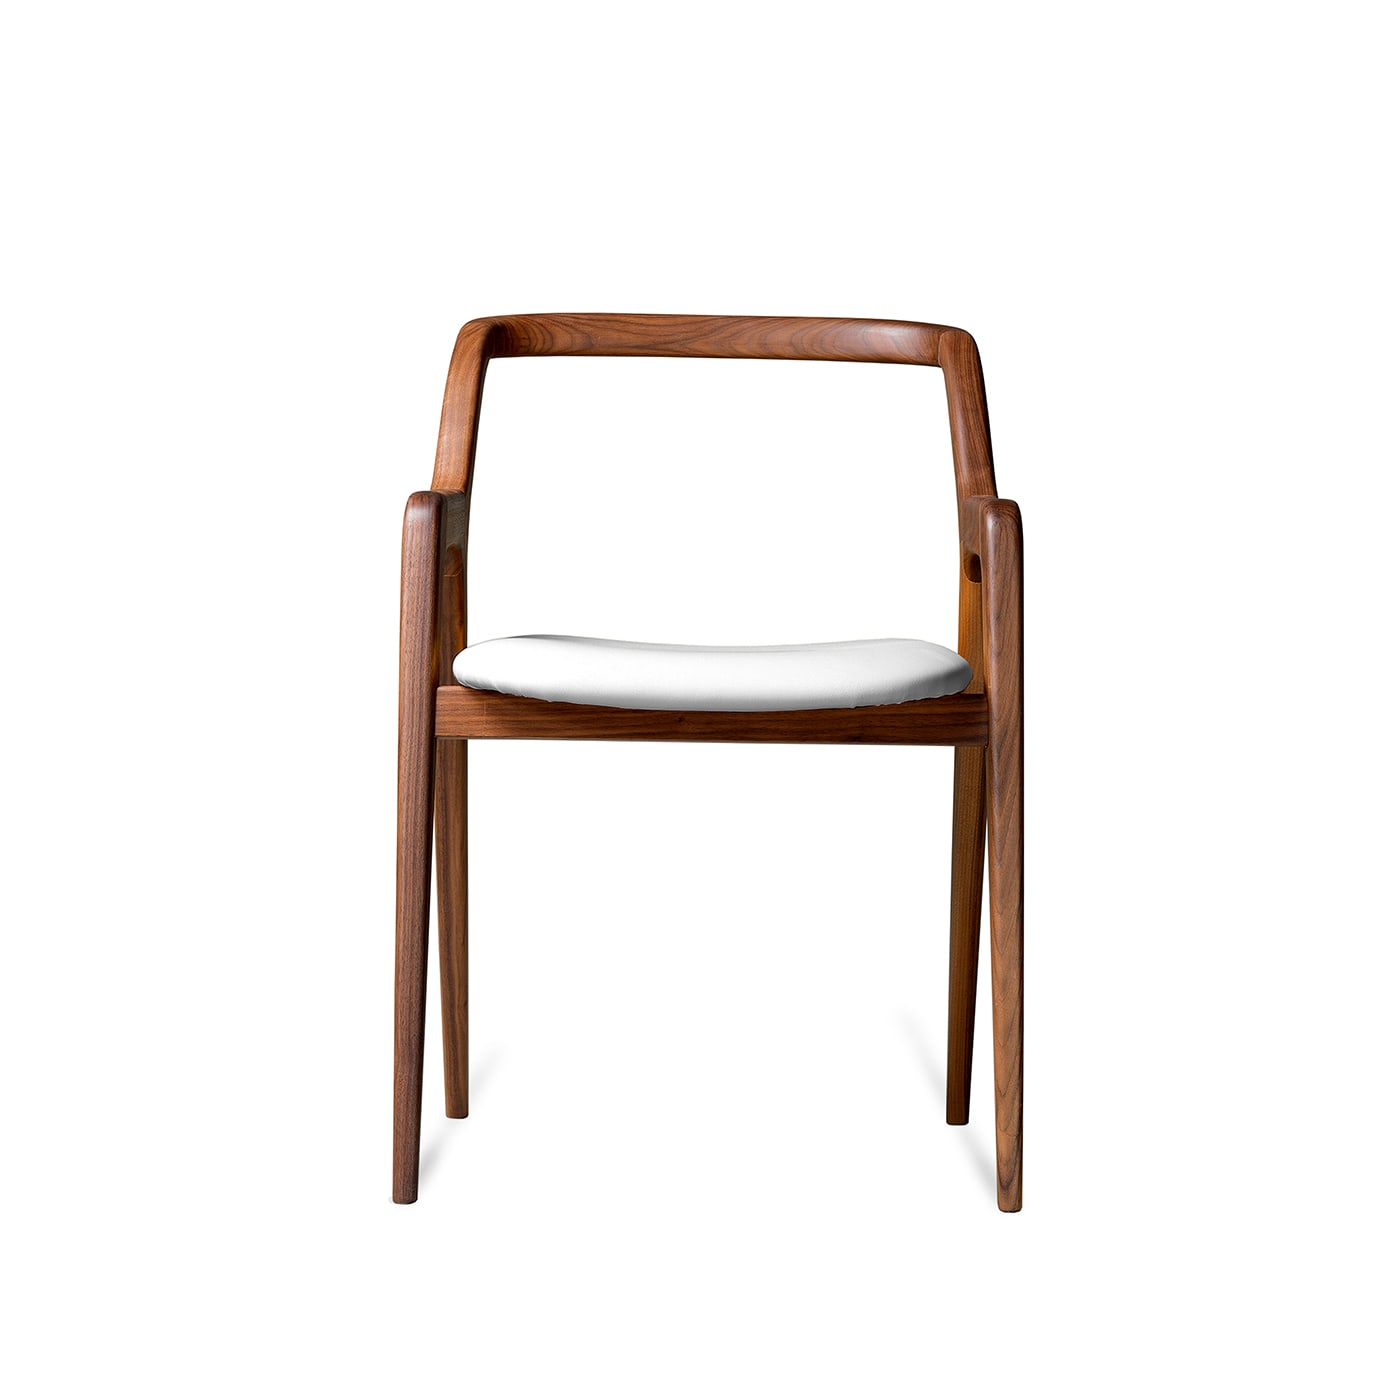 In Breve Natural Solid Walnut Chair ☞ Upholstery: Leather PANDORA 601